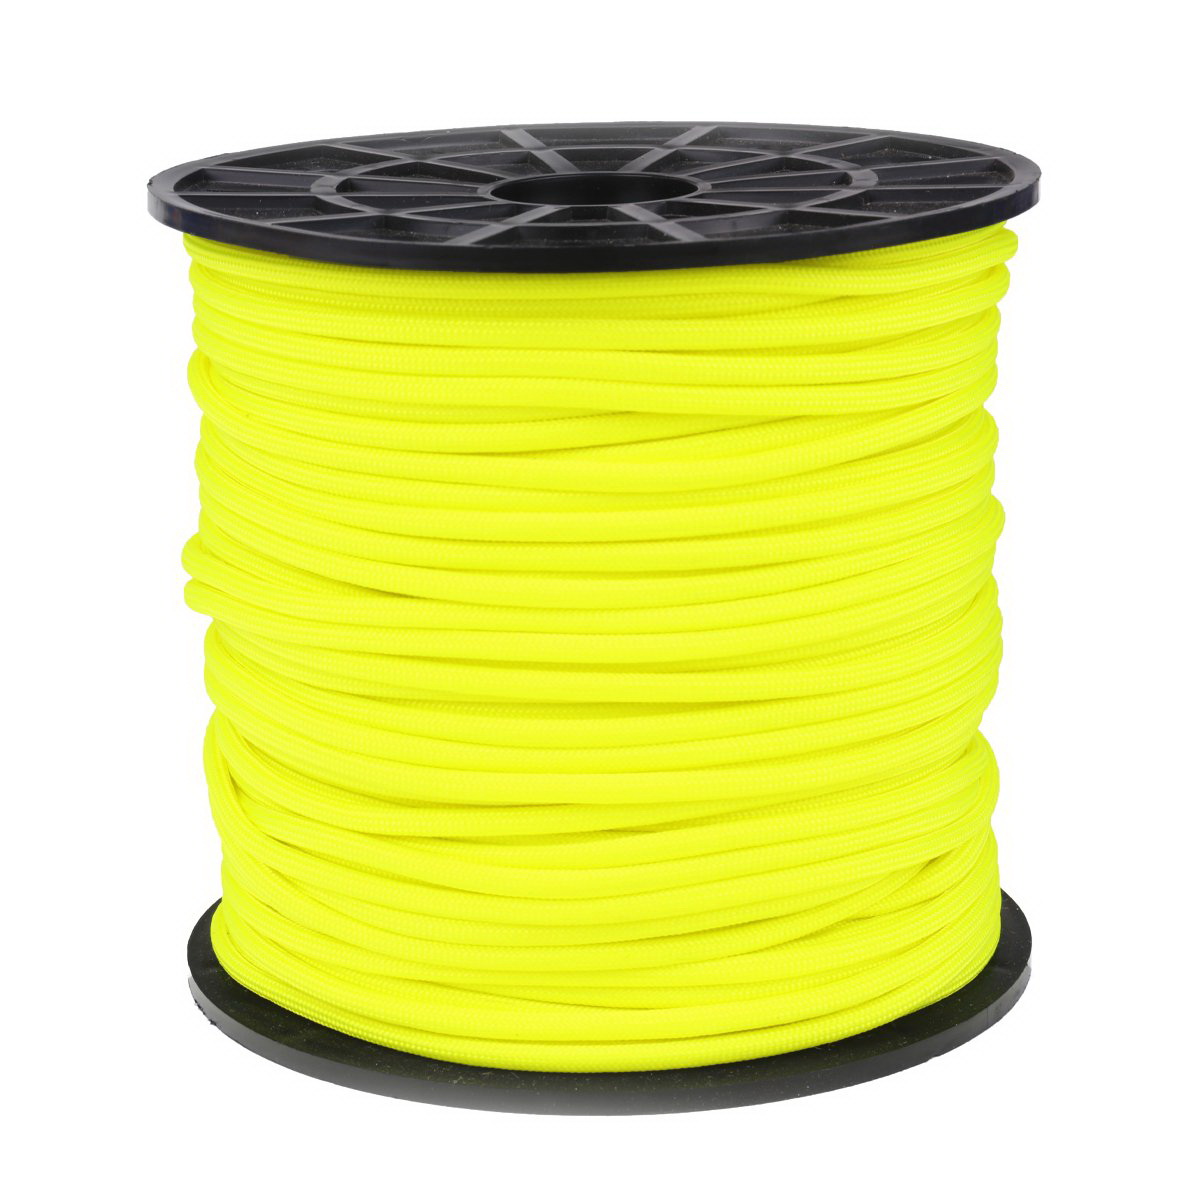 Atwood Rope Mfg SS19NEONYLW Paracord, 5/32 in Dia, 100 ft L, Neon Yellow - 3